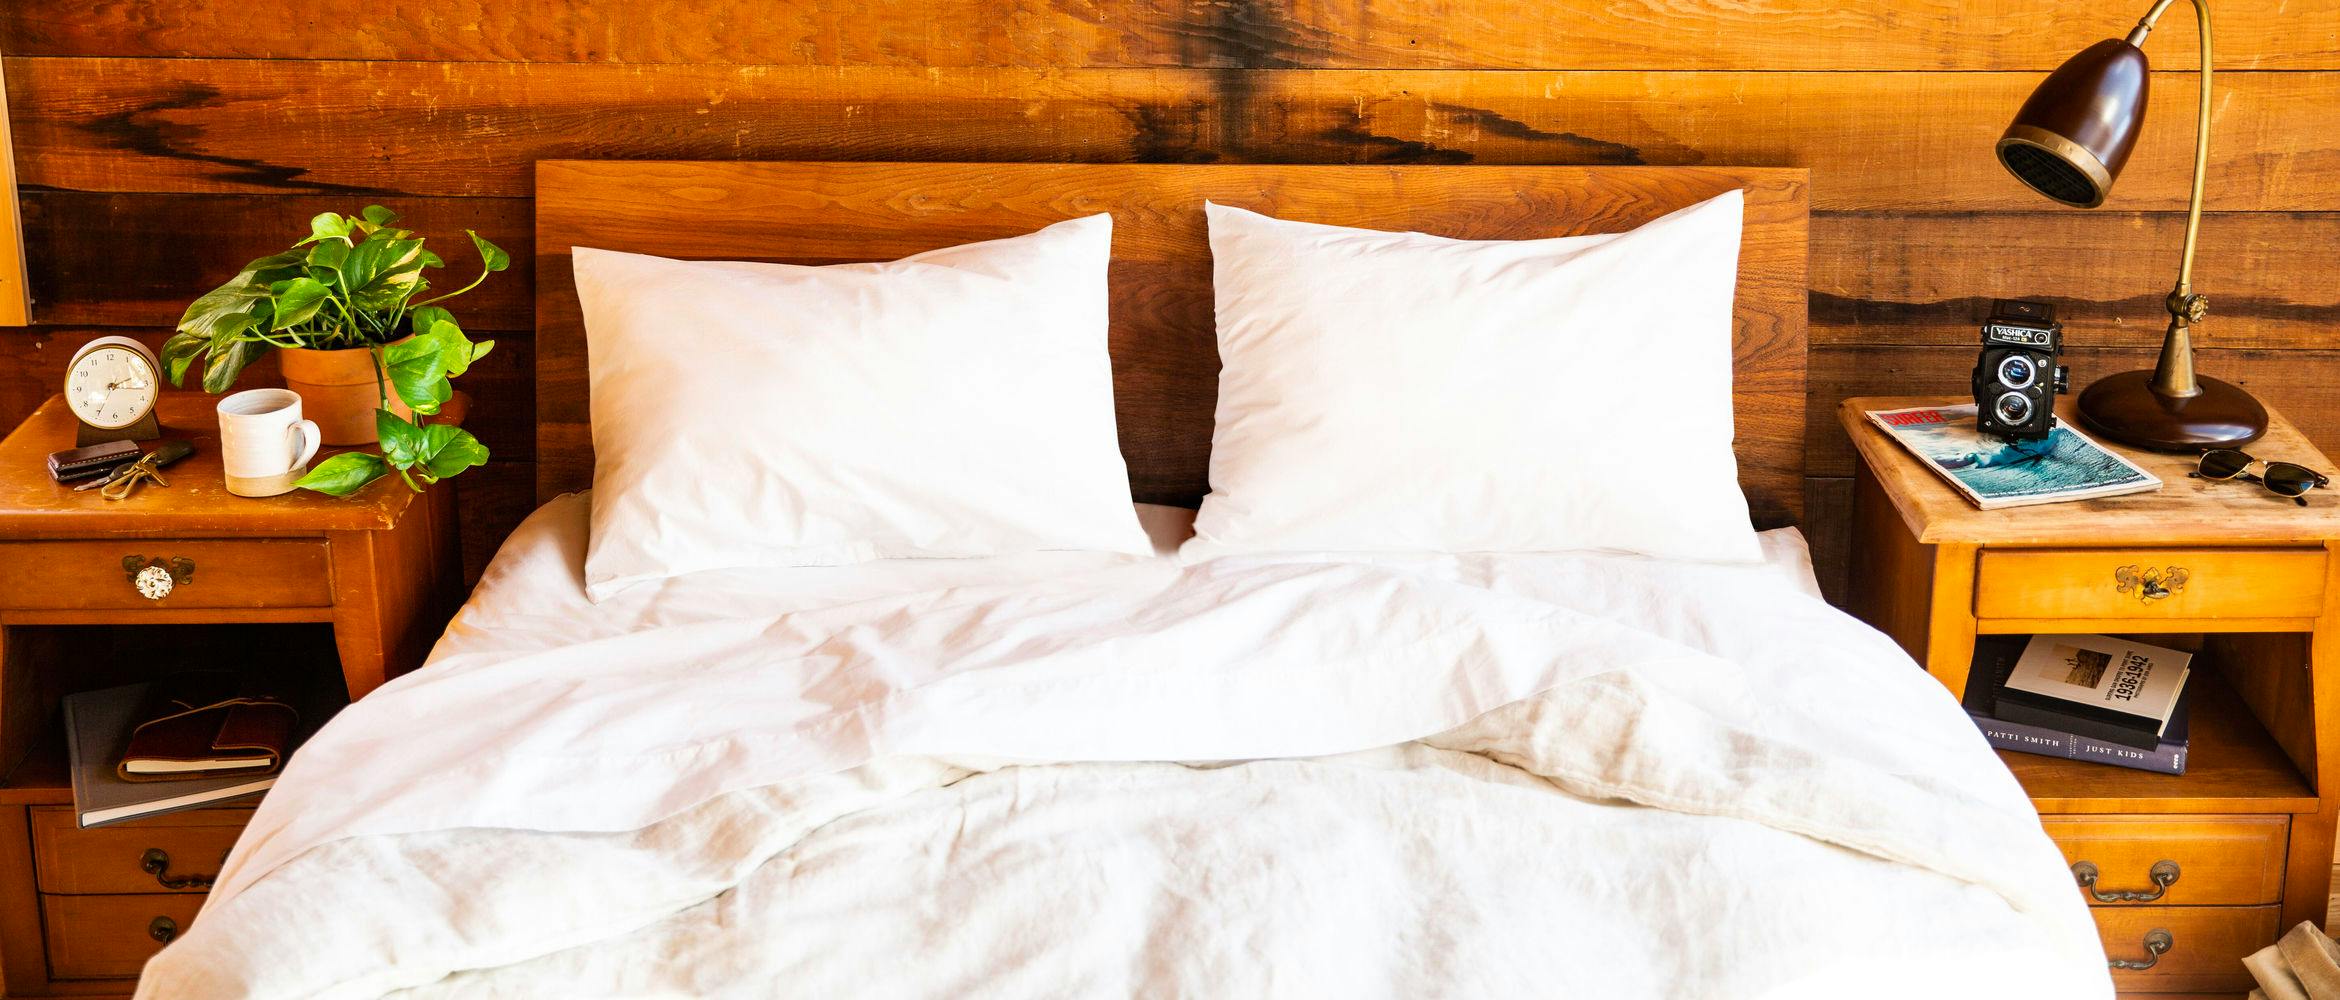 The Huckberry Guide To Choosing Your Next Set Of Sheets Huckberry